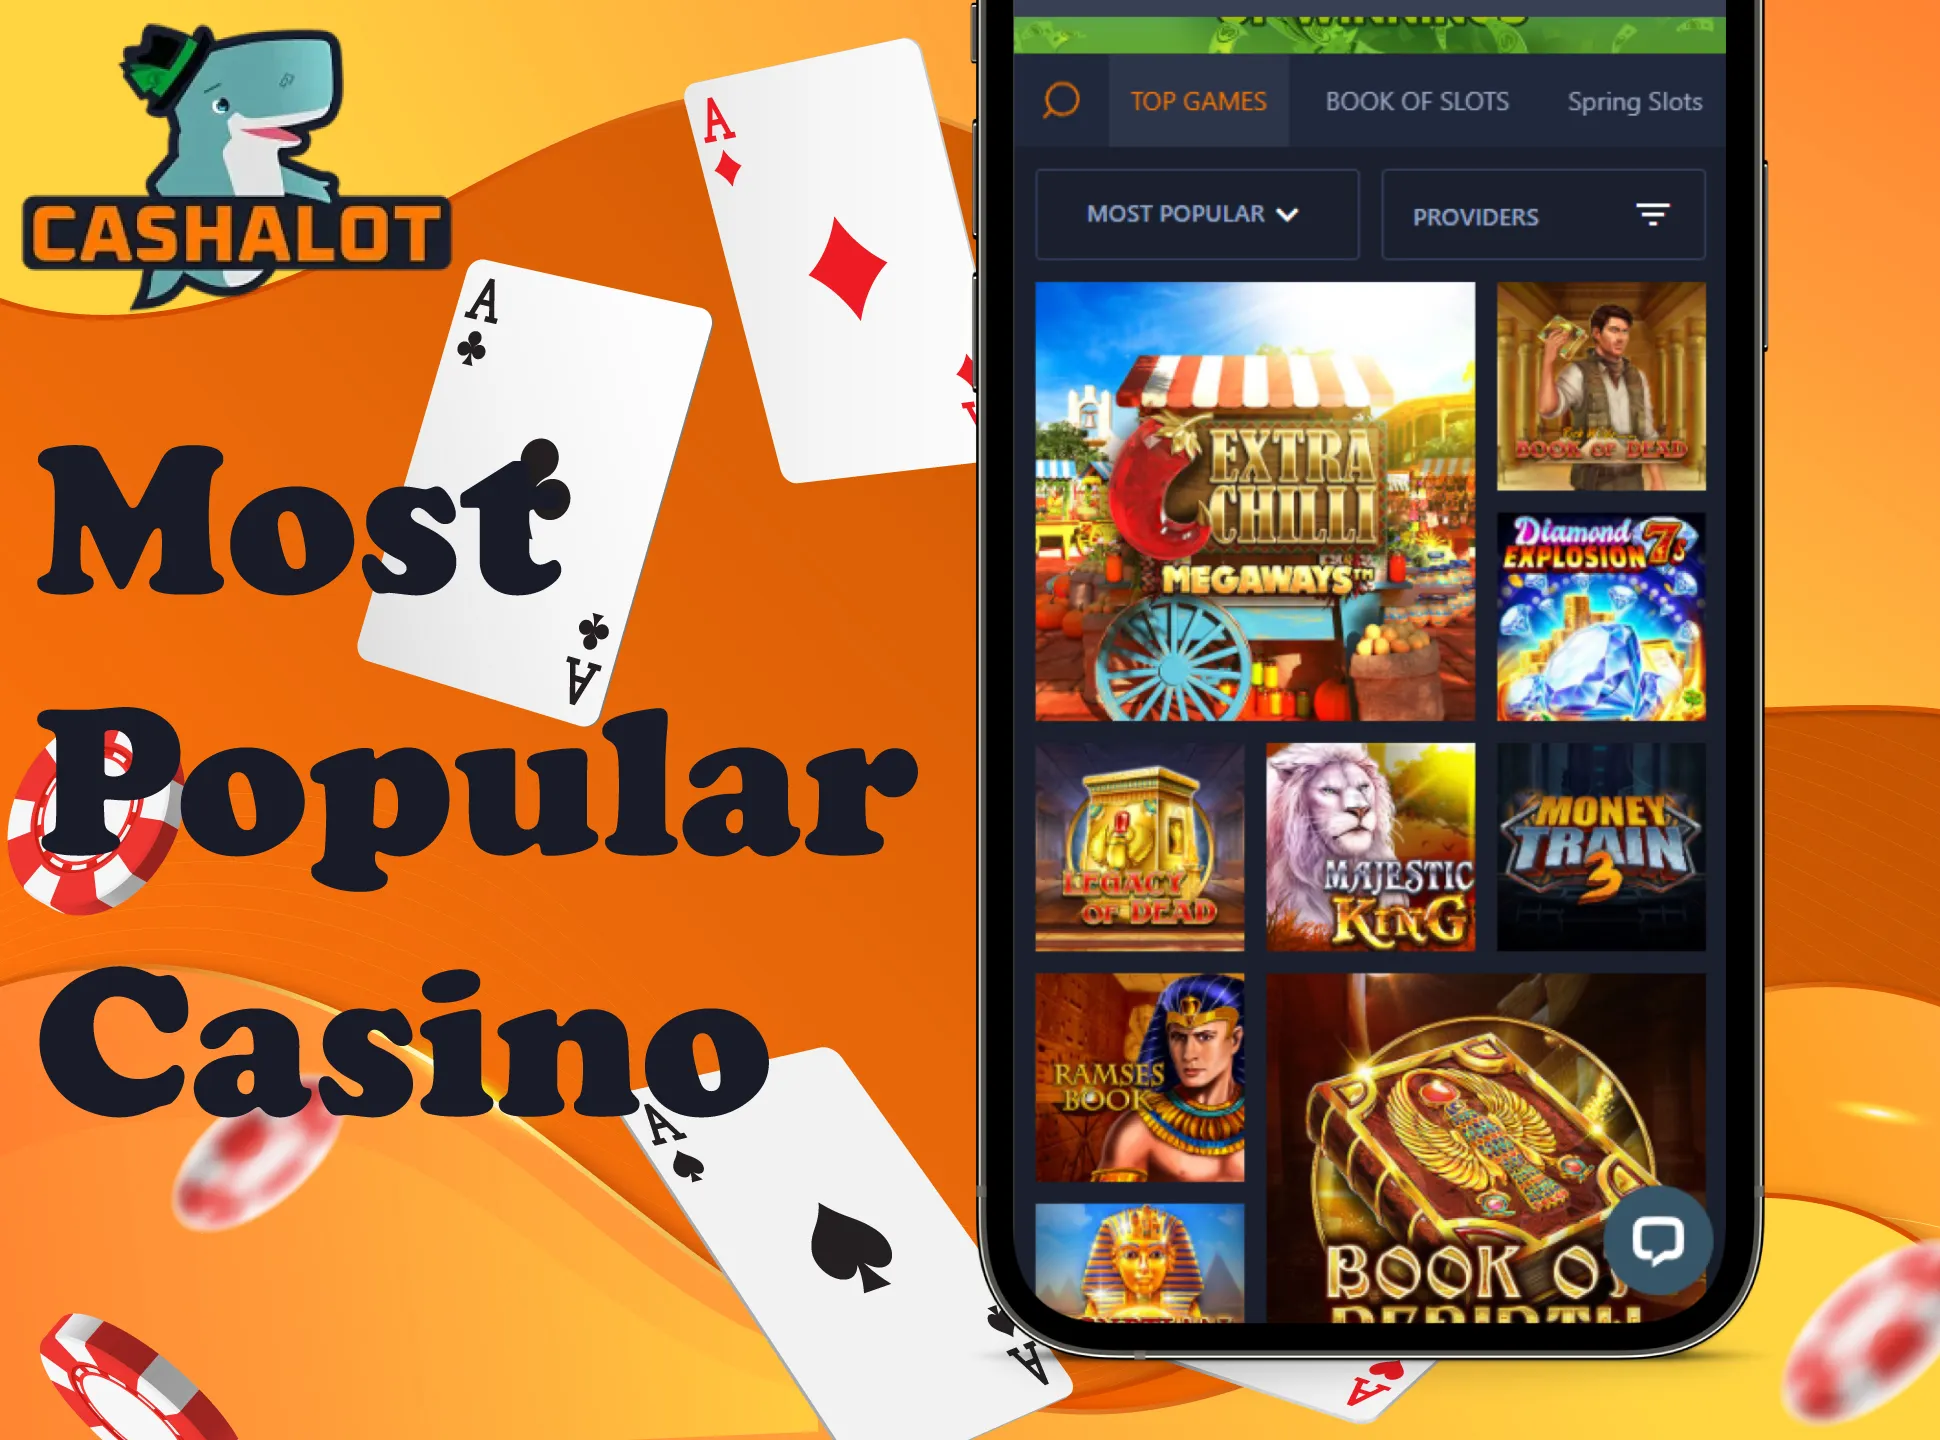 Find your favorite casino games with the Cashalot app.